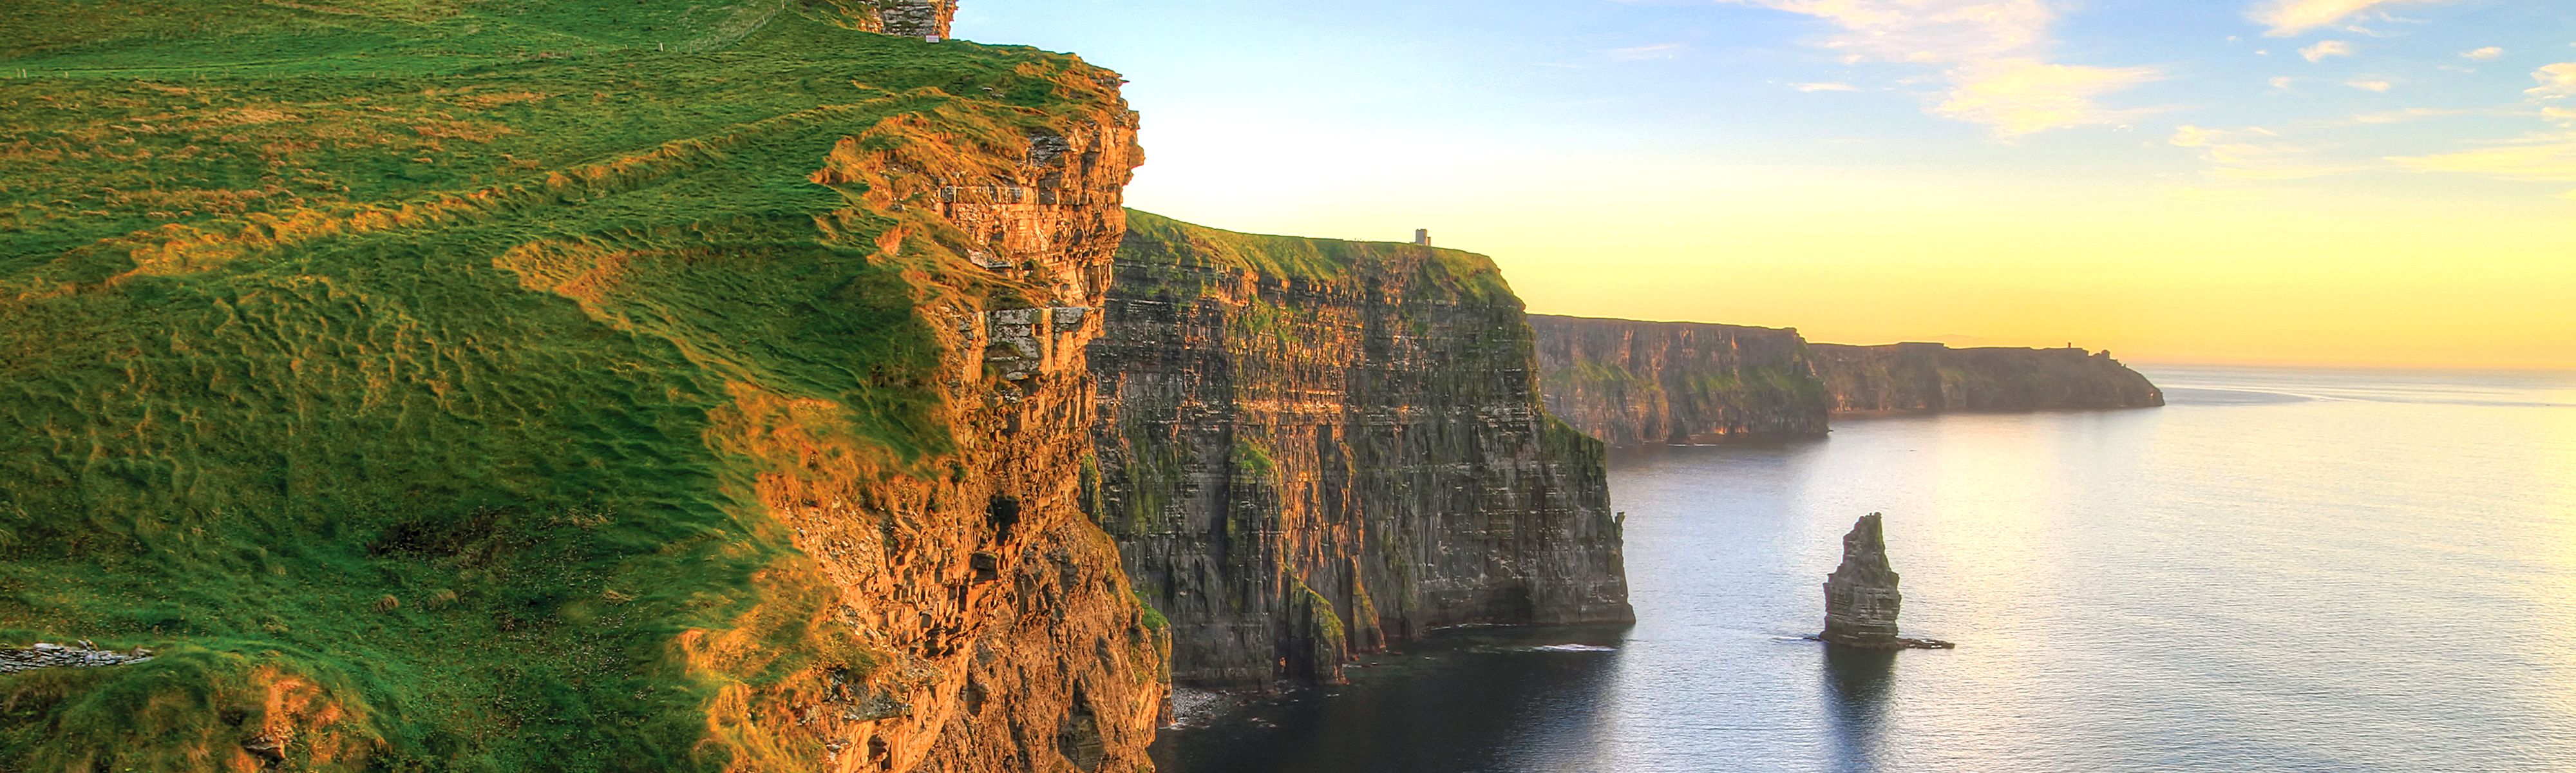 cliffs of moher in ireland at sunset